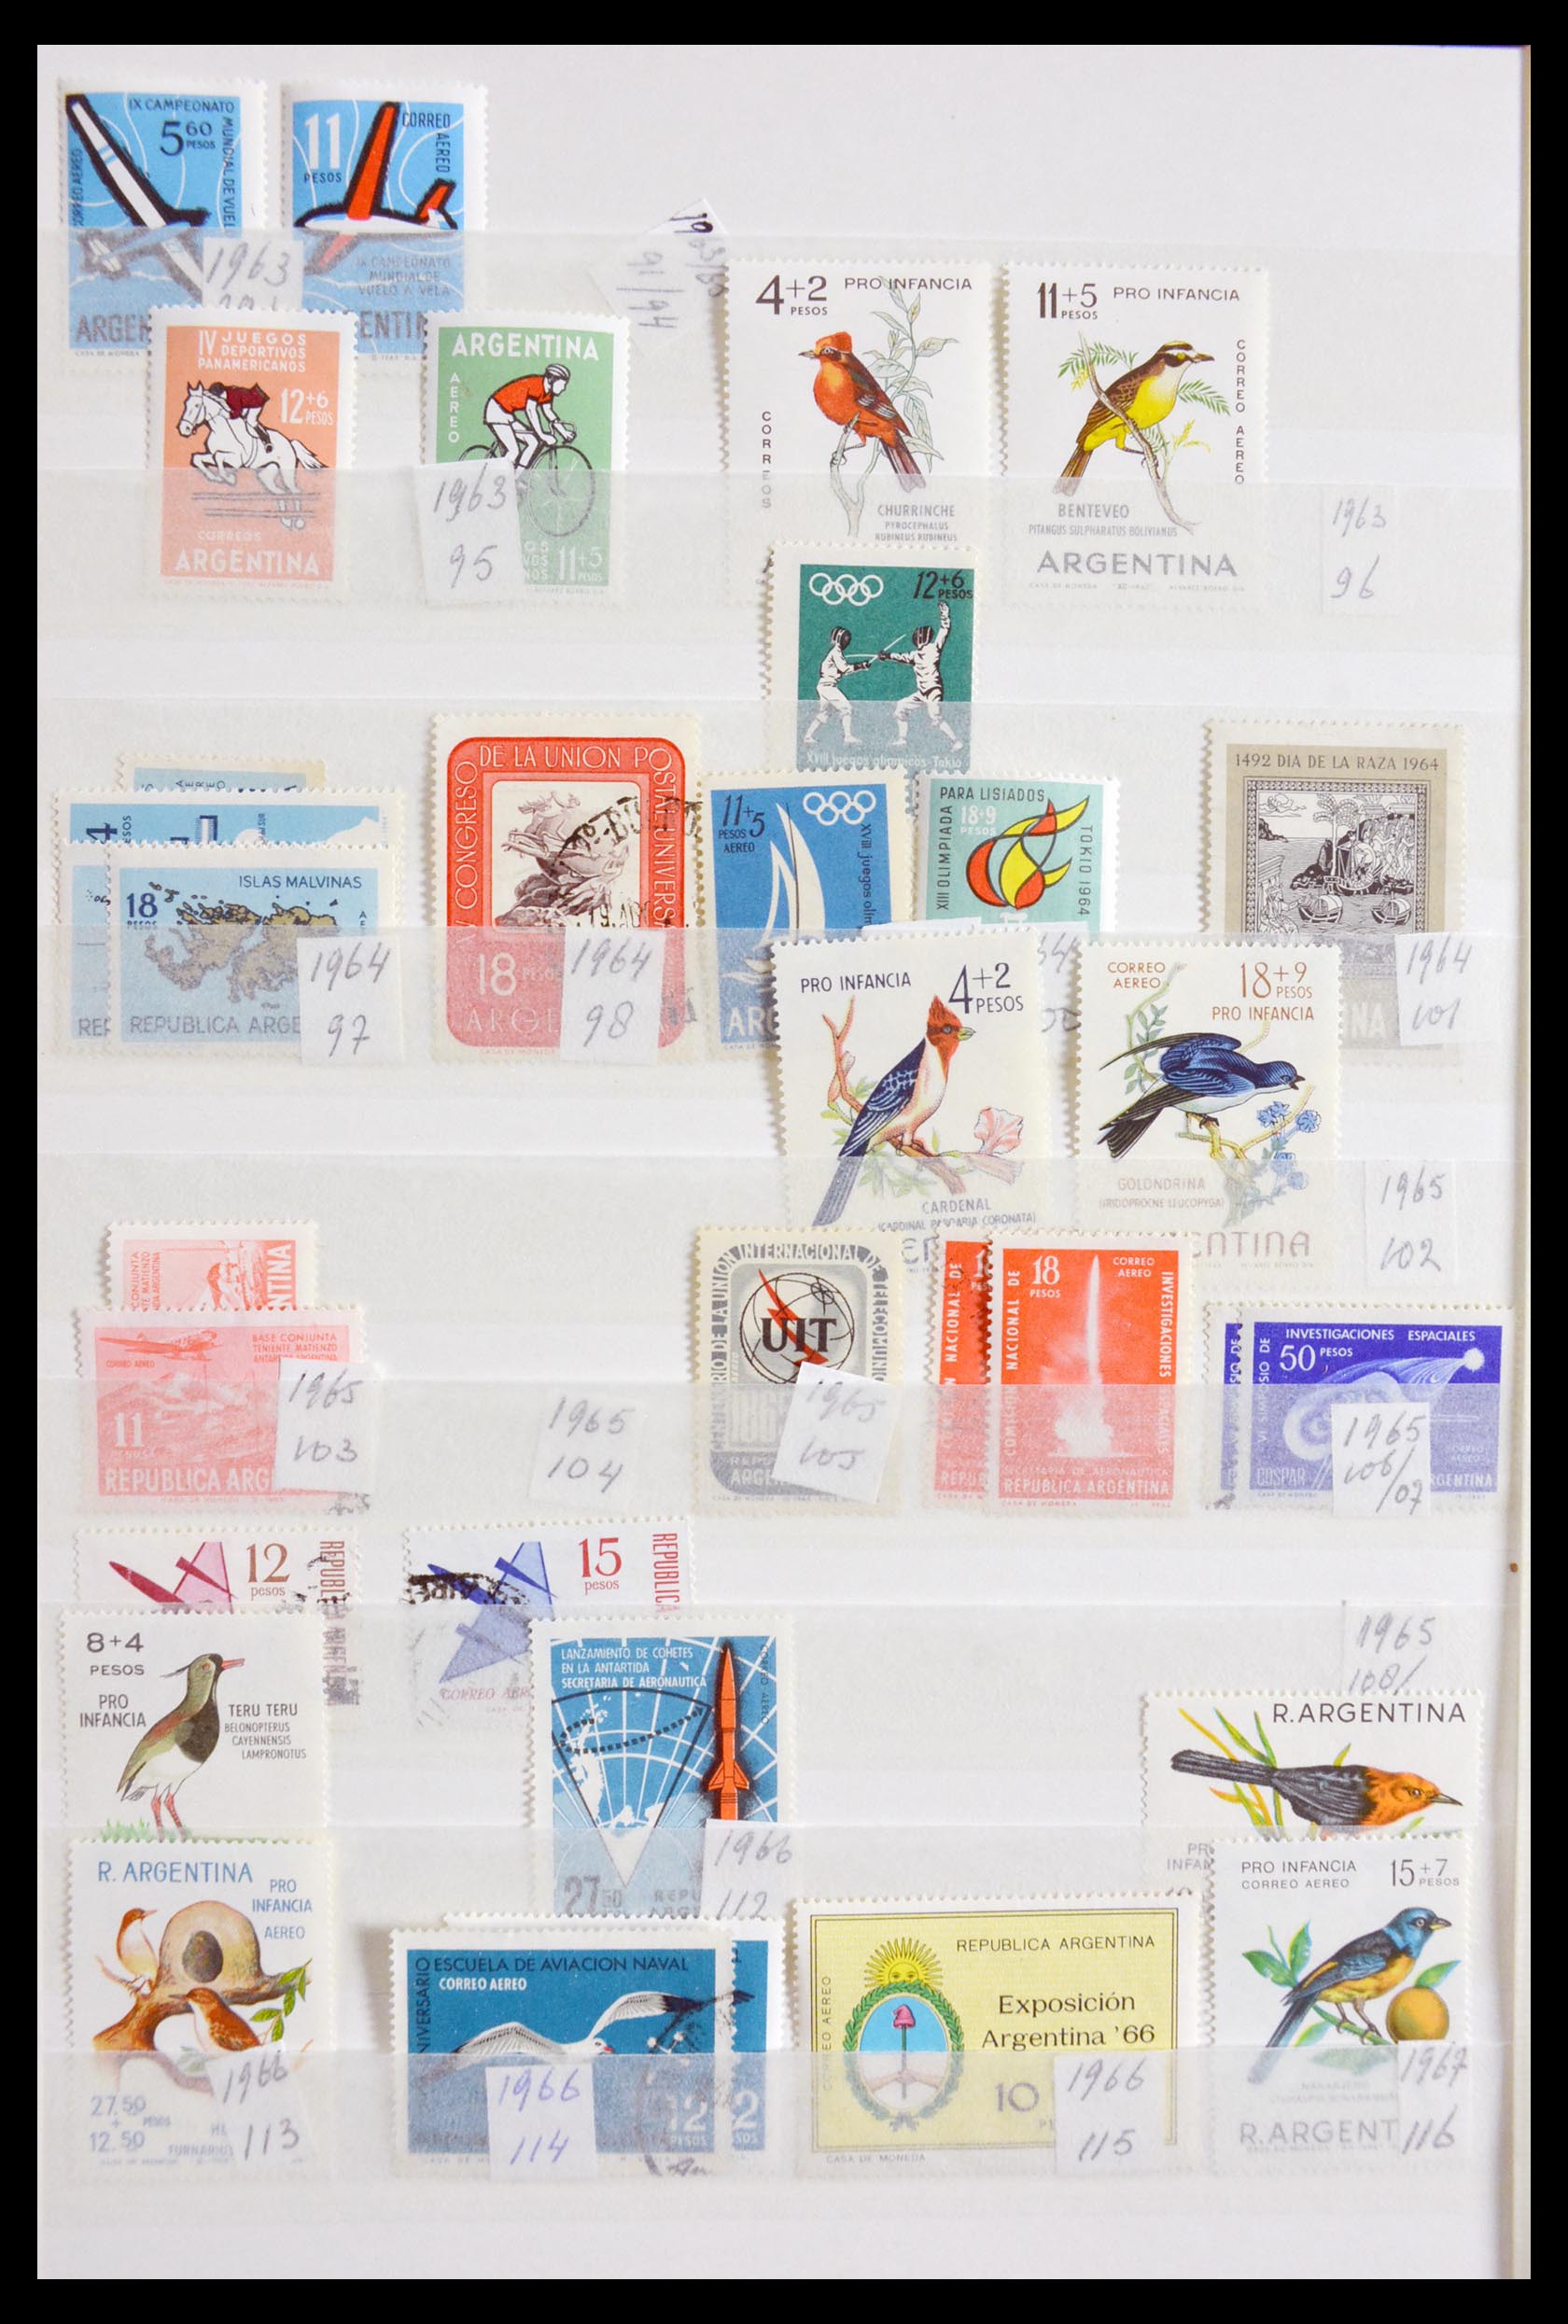 29917 004 - 29917 Latin America airmail stamps.